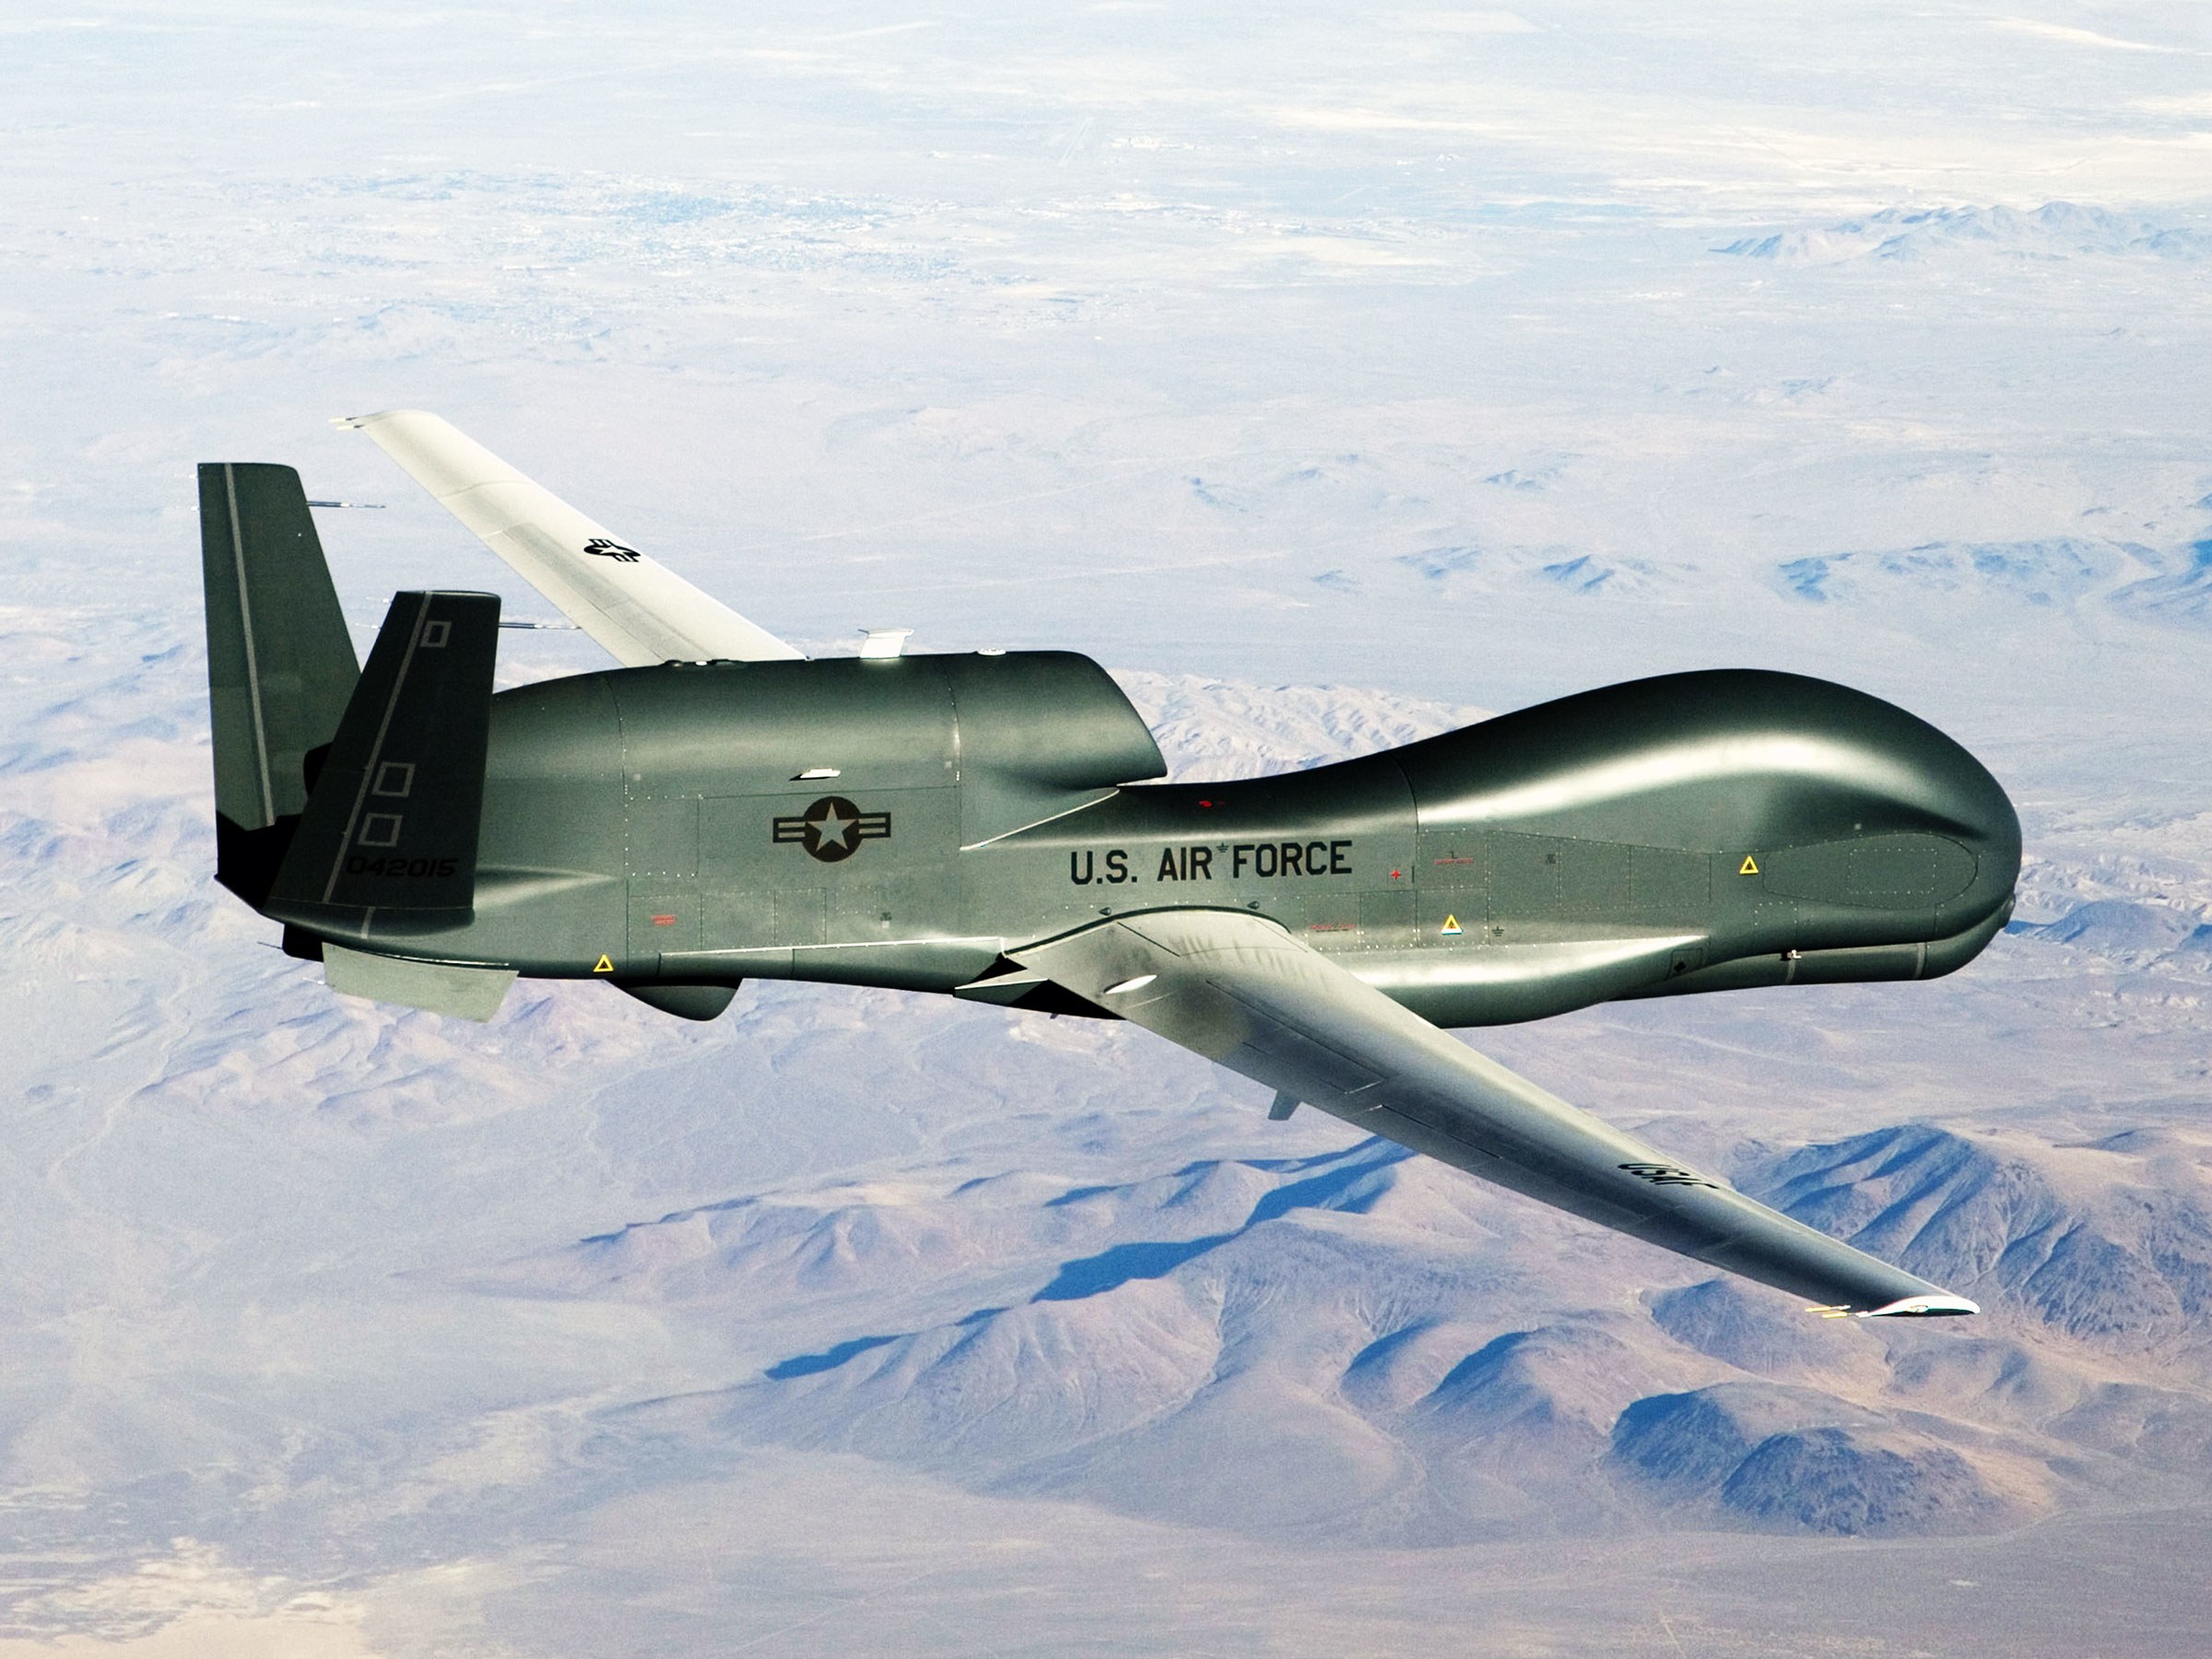 US Iran tensions; the Global Hawk drone that was shot down.